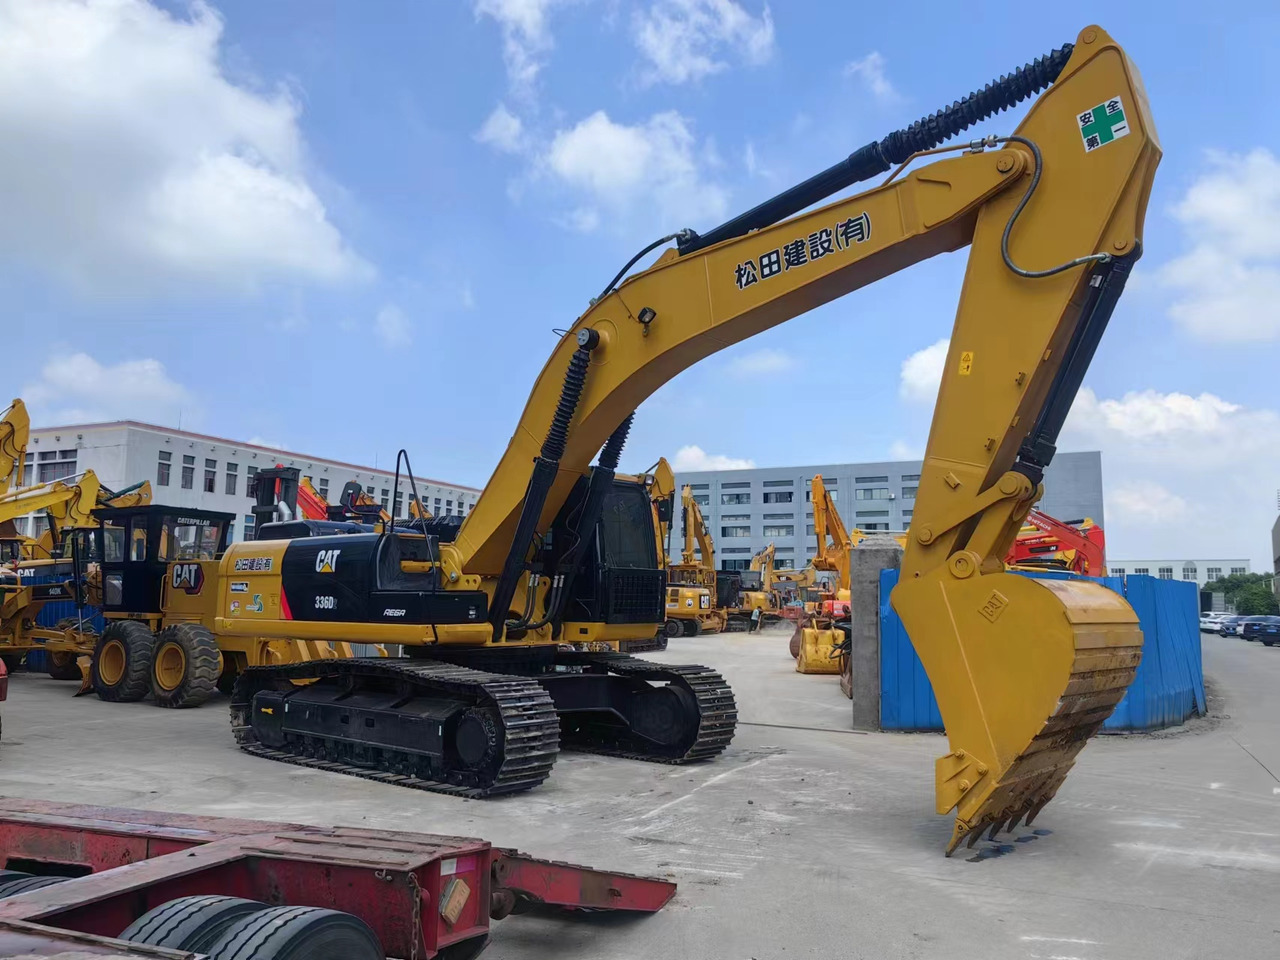 Crawler excavator 95%new Original Japan made CATERPILLAR Cat 336D2, Large engineering construction machinery good condition in stock hot selling !!!: picture 6